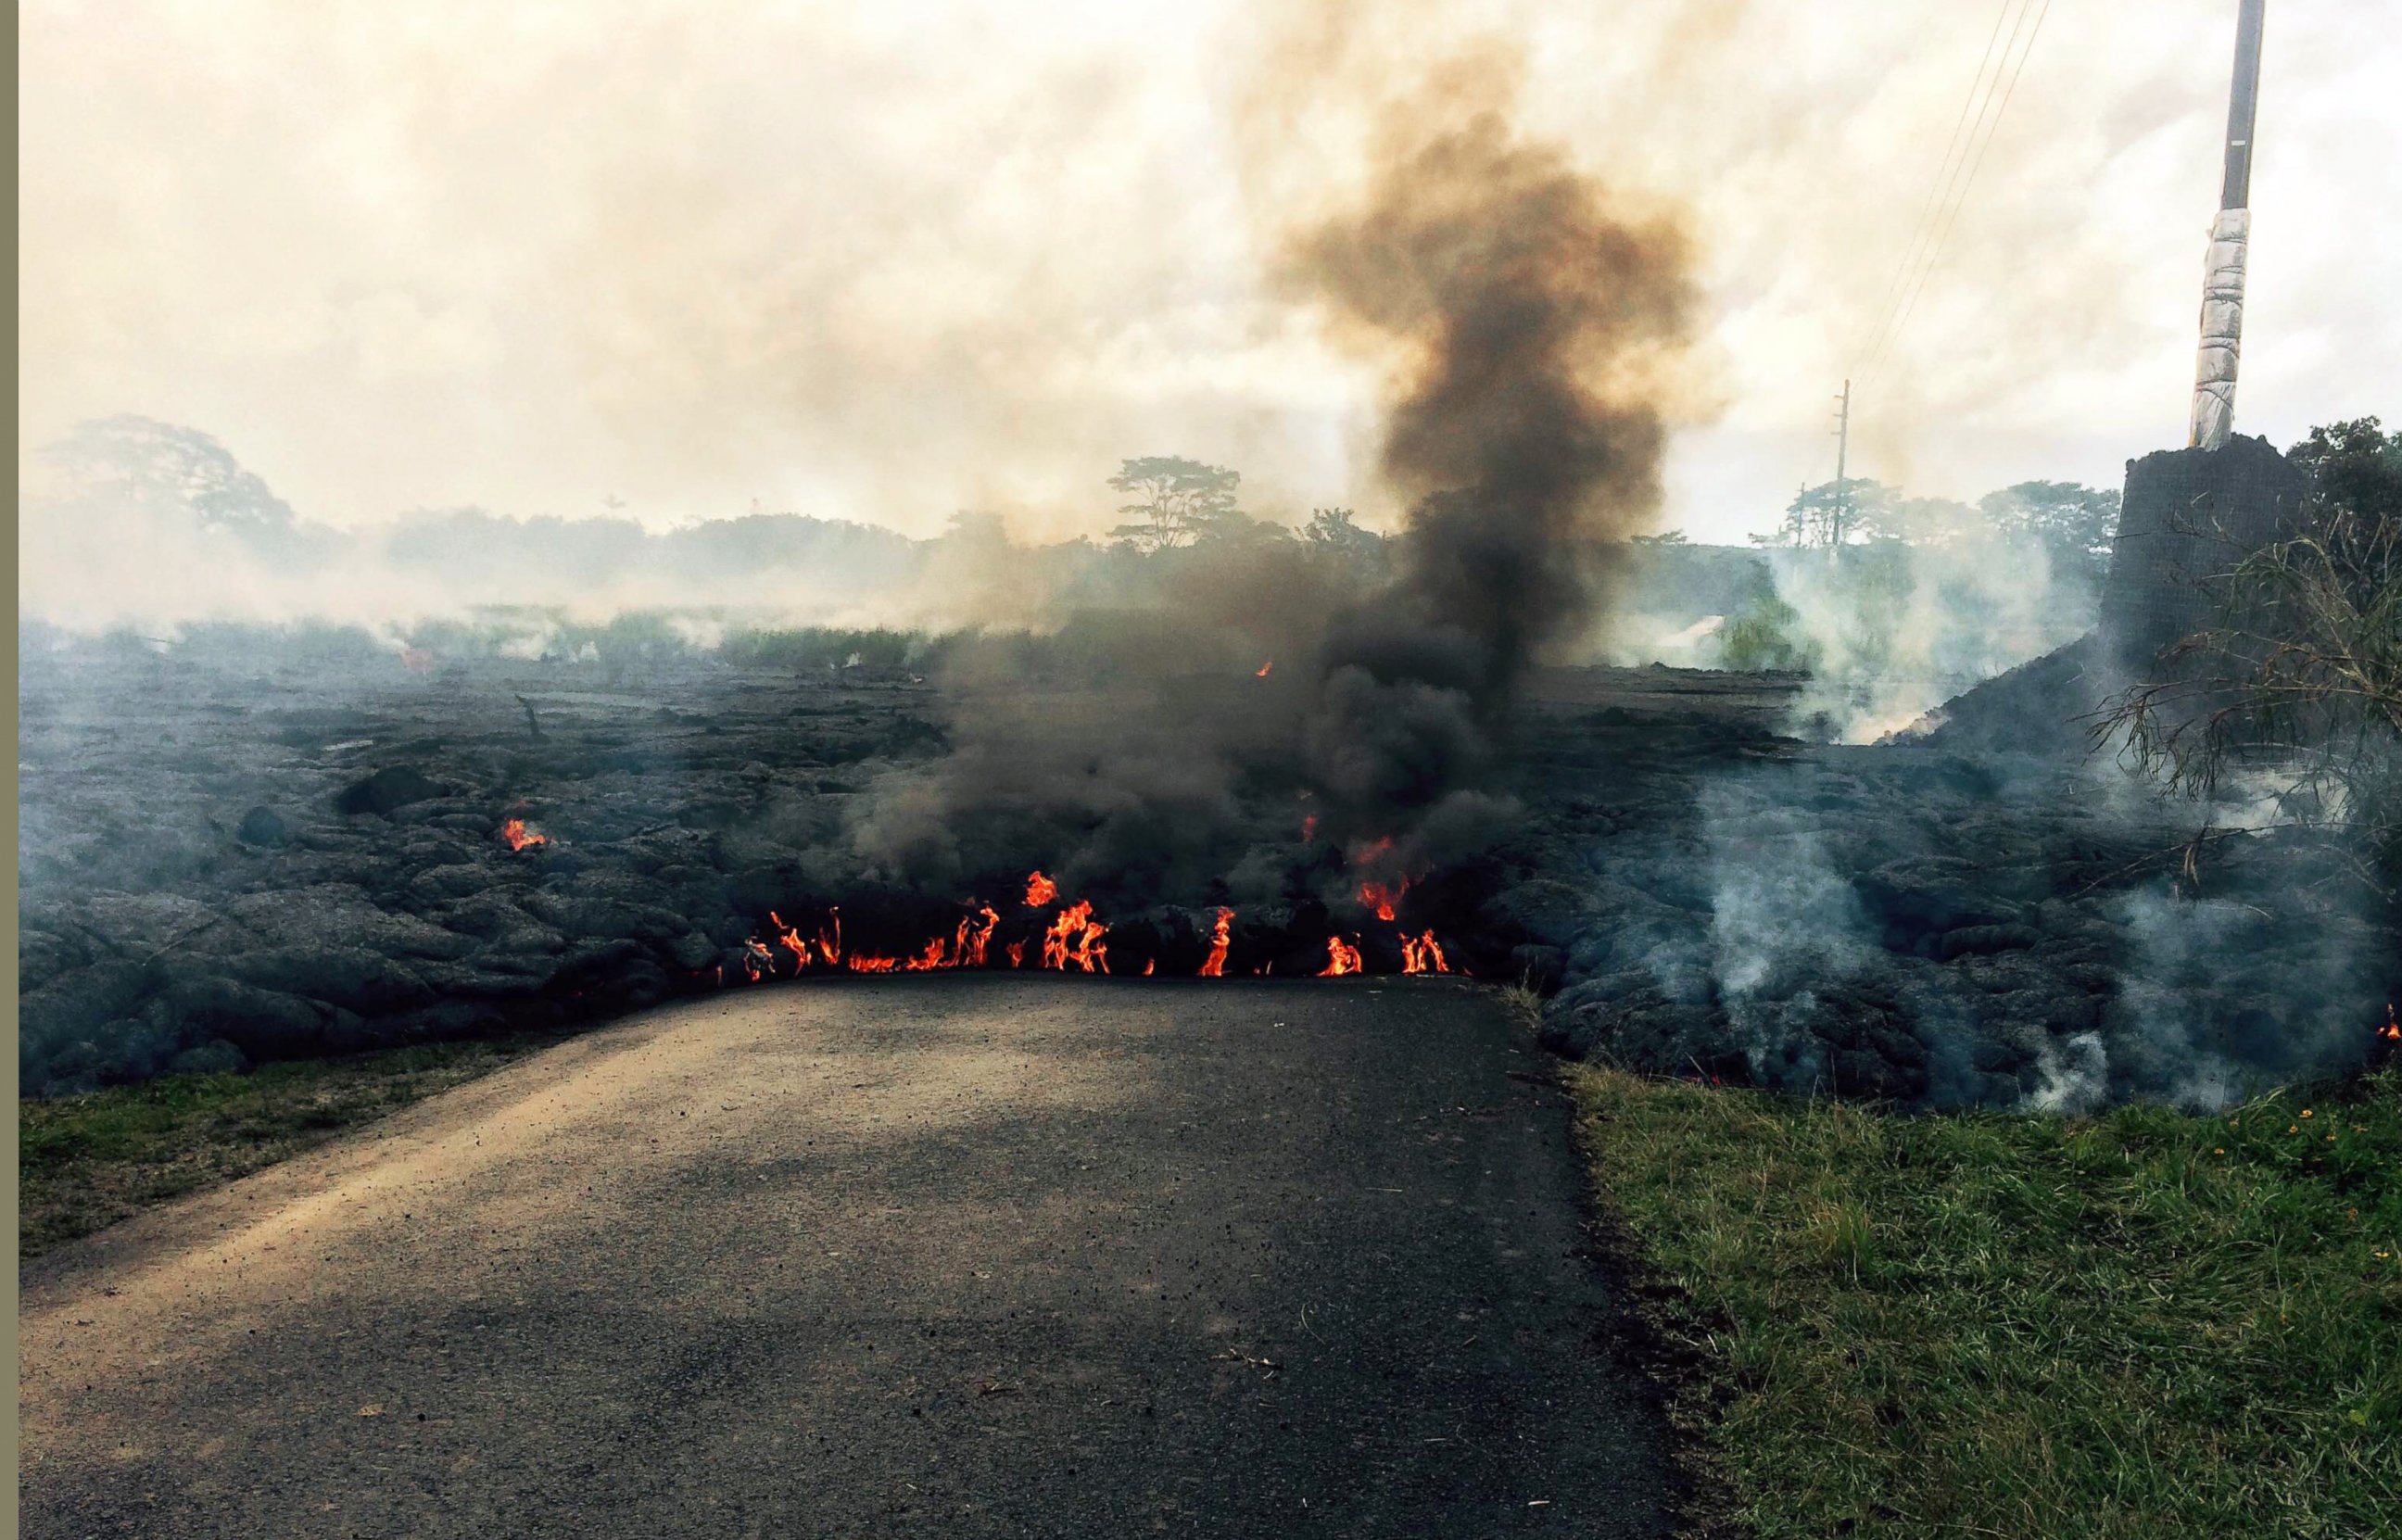 PHOTO: The lava flow from Kilauea Volcano that began June 27 is seen as it crosses Apaa Street near the town of Pahoa on the Big Island of Hawaii in this, Oct. 24, 2014, photo from the U.S. Geological Survey.